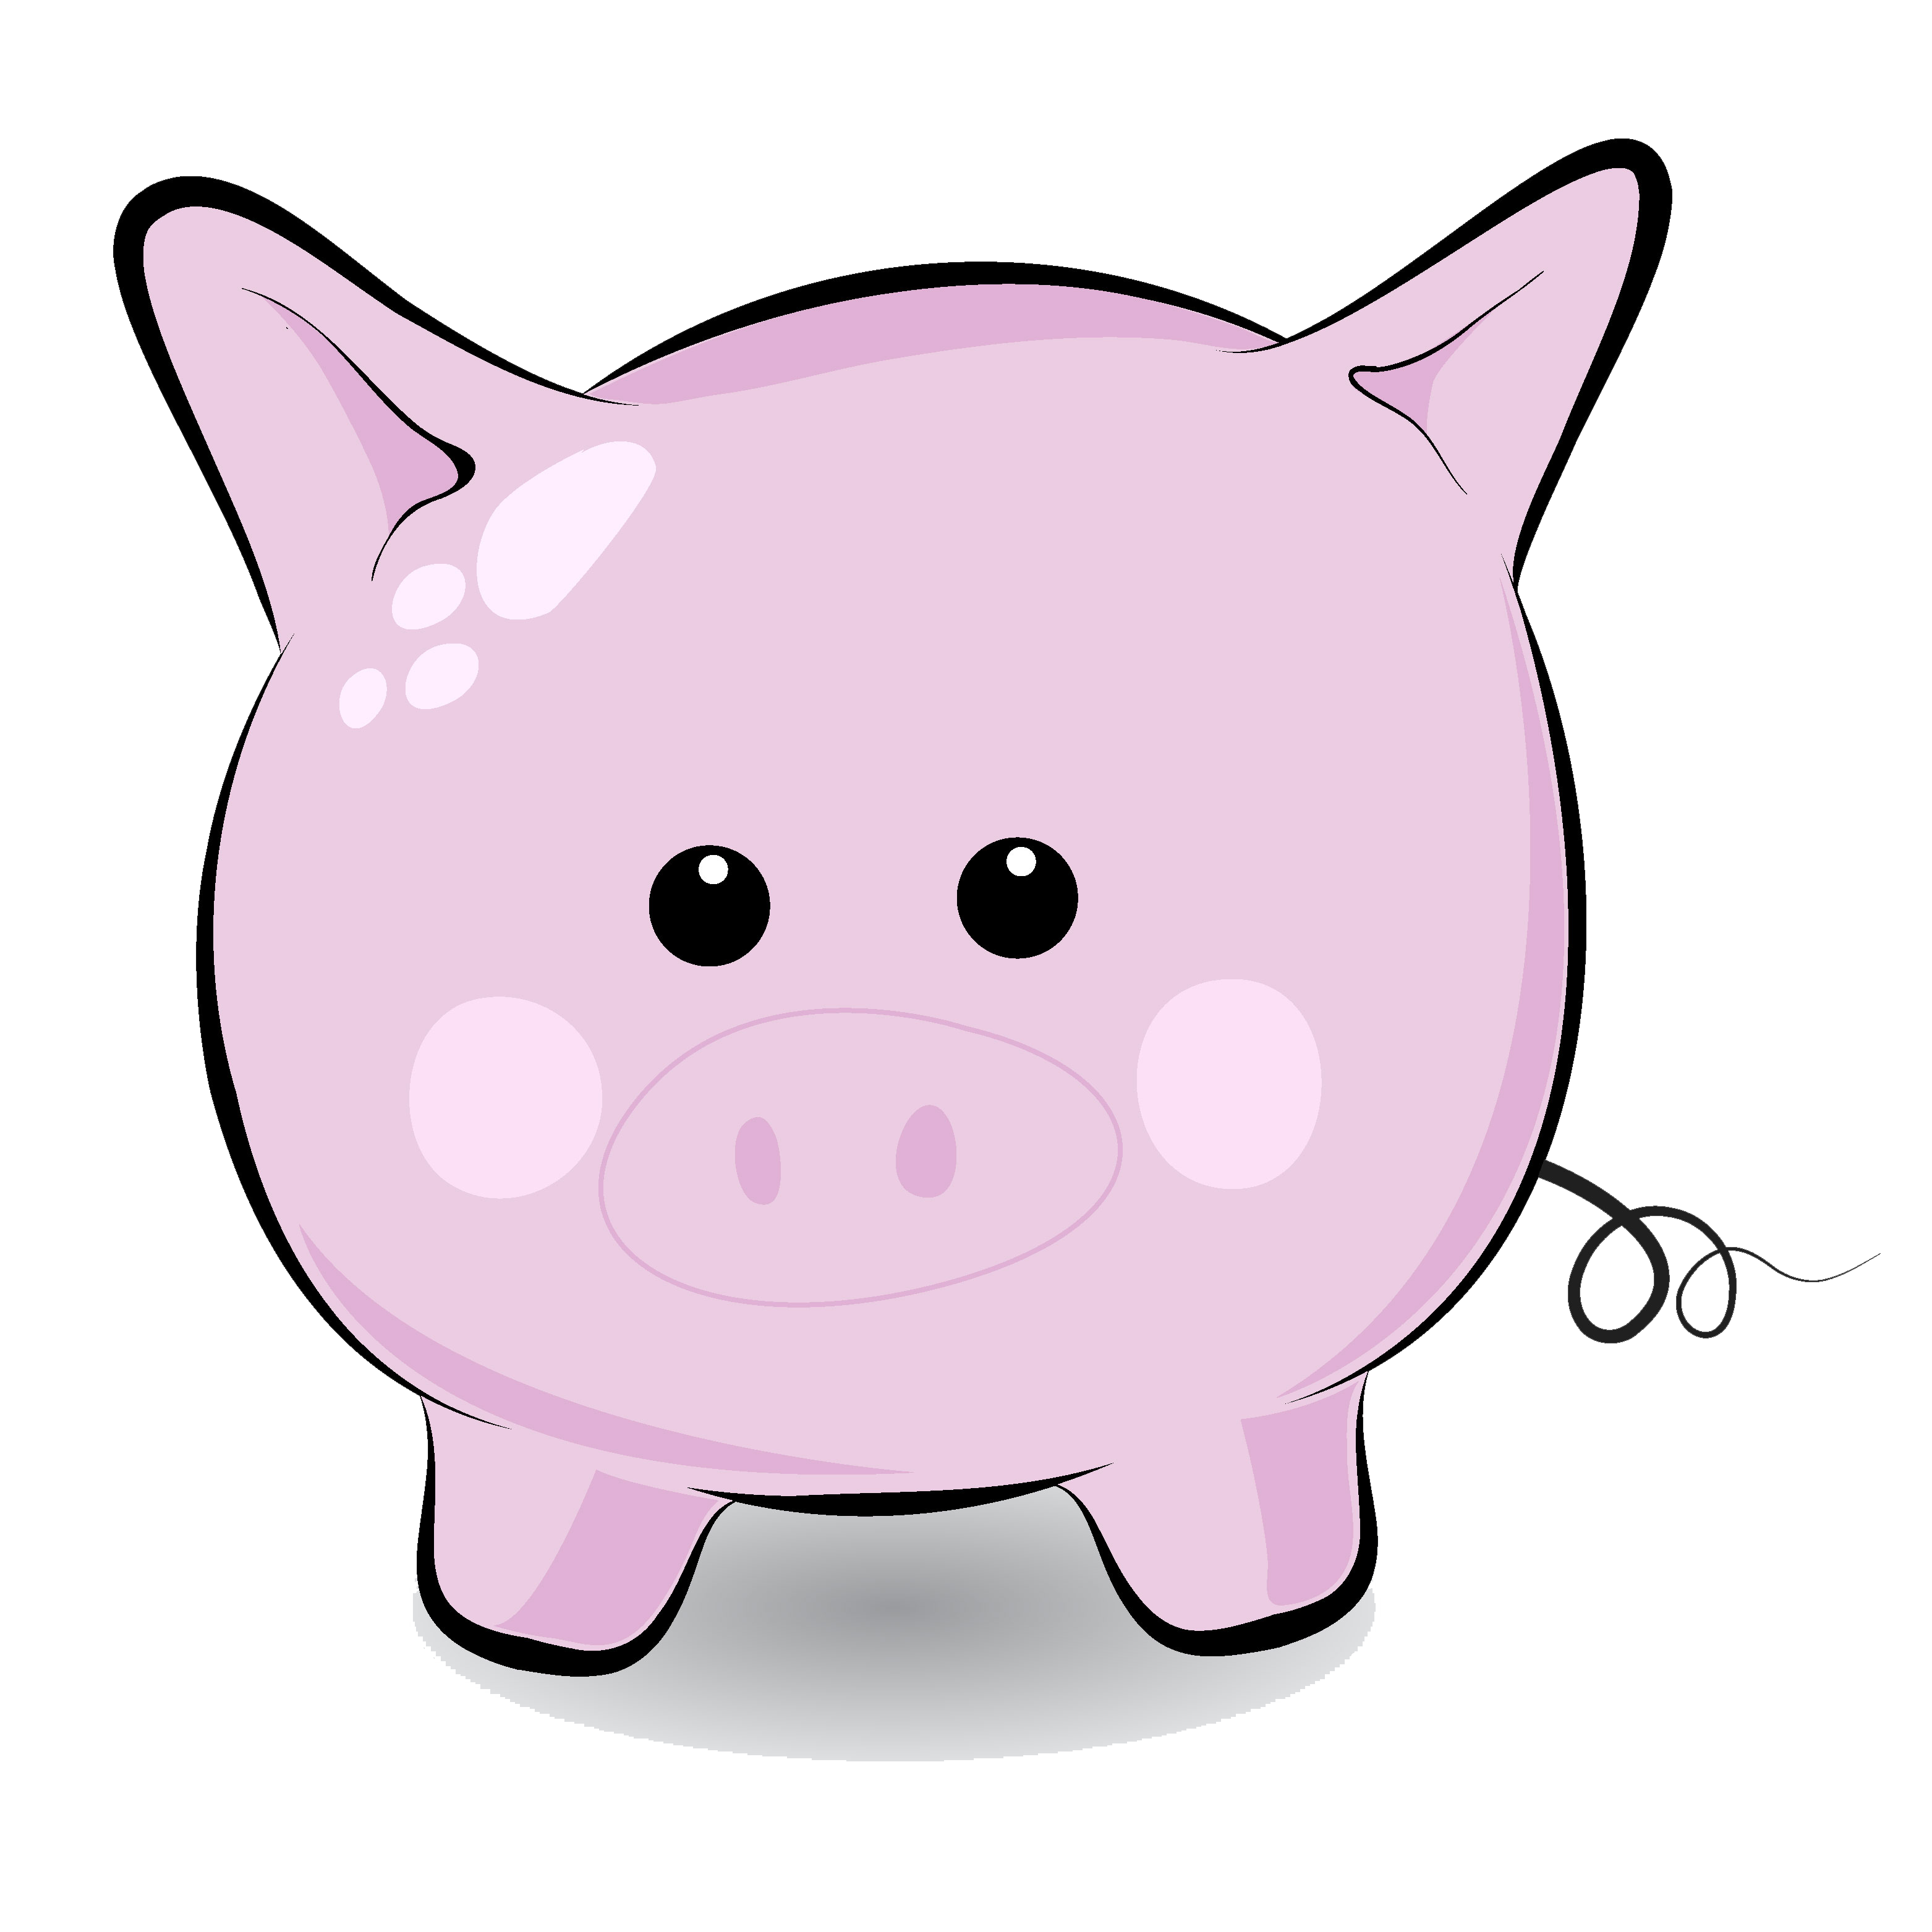 Pig Outline Clip Art - Clipart library